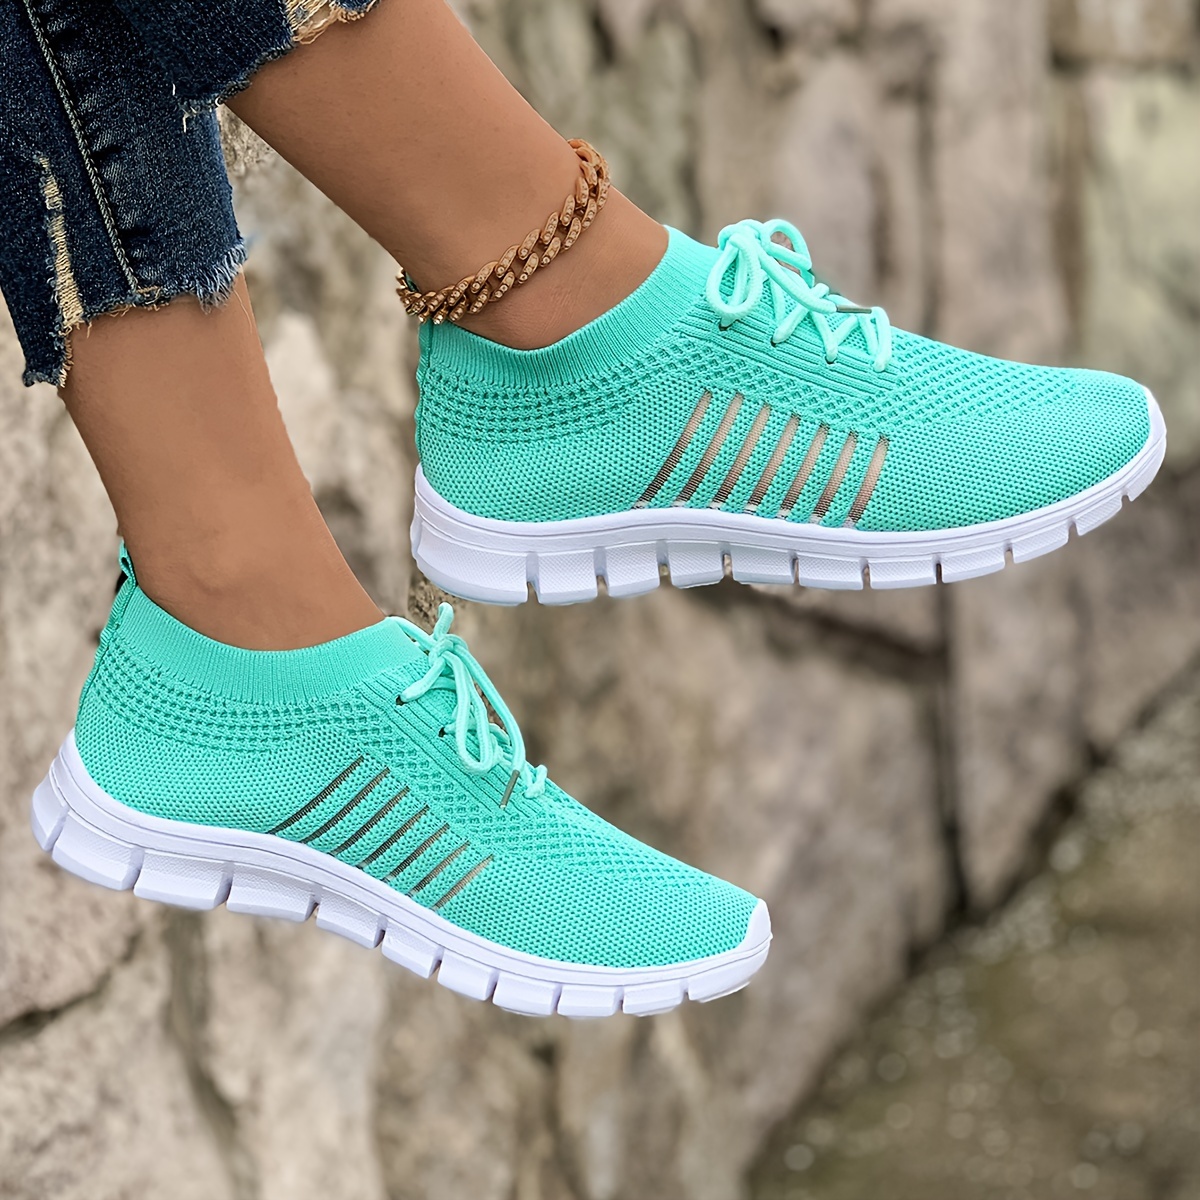 mesh sneakers women s knit lightweight breathable mesh lace details 3